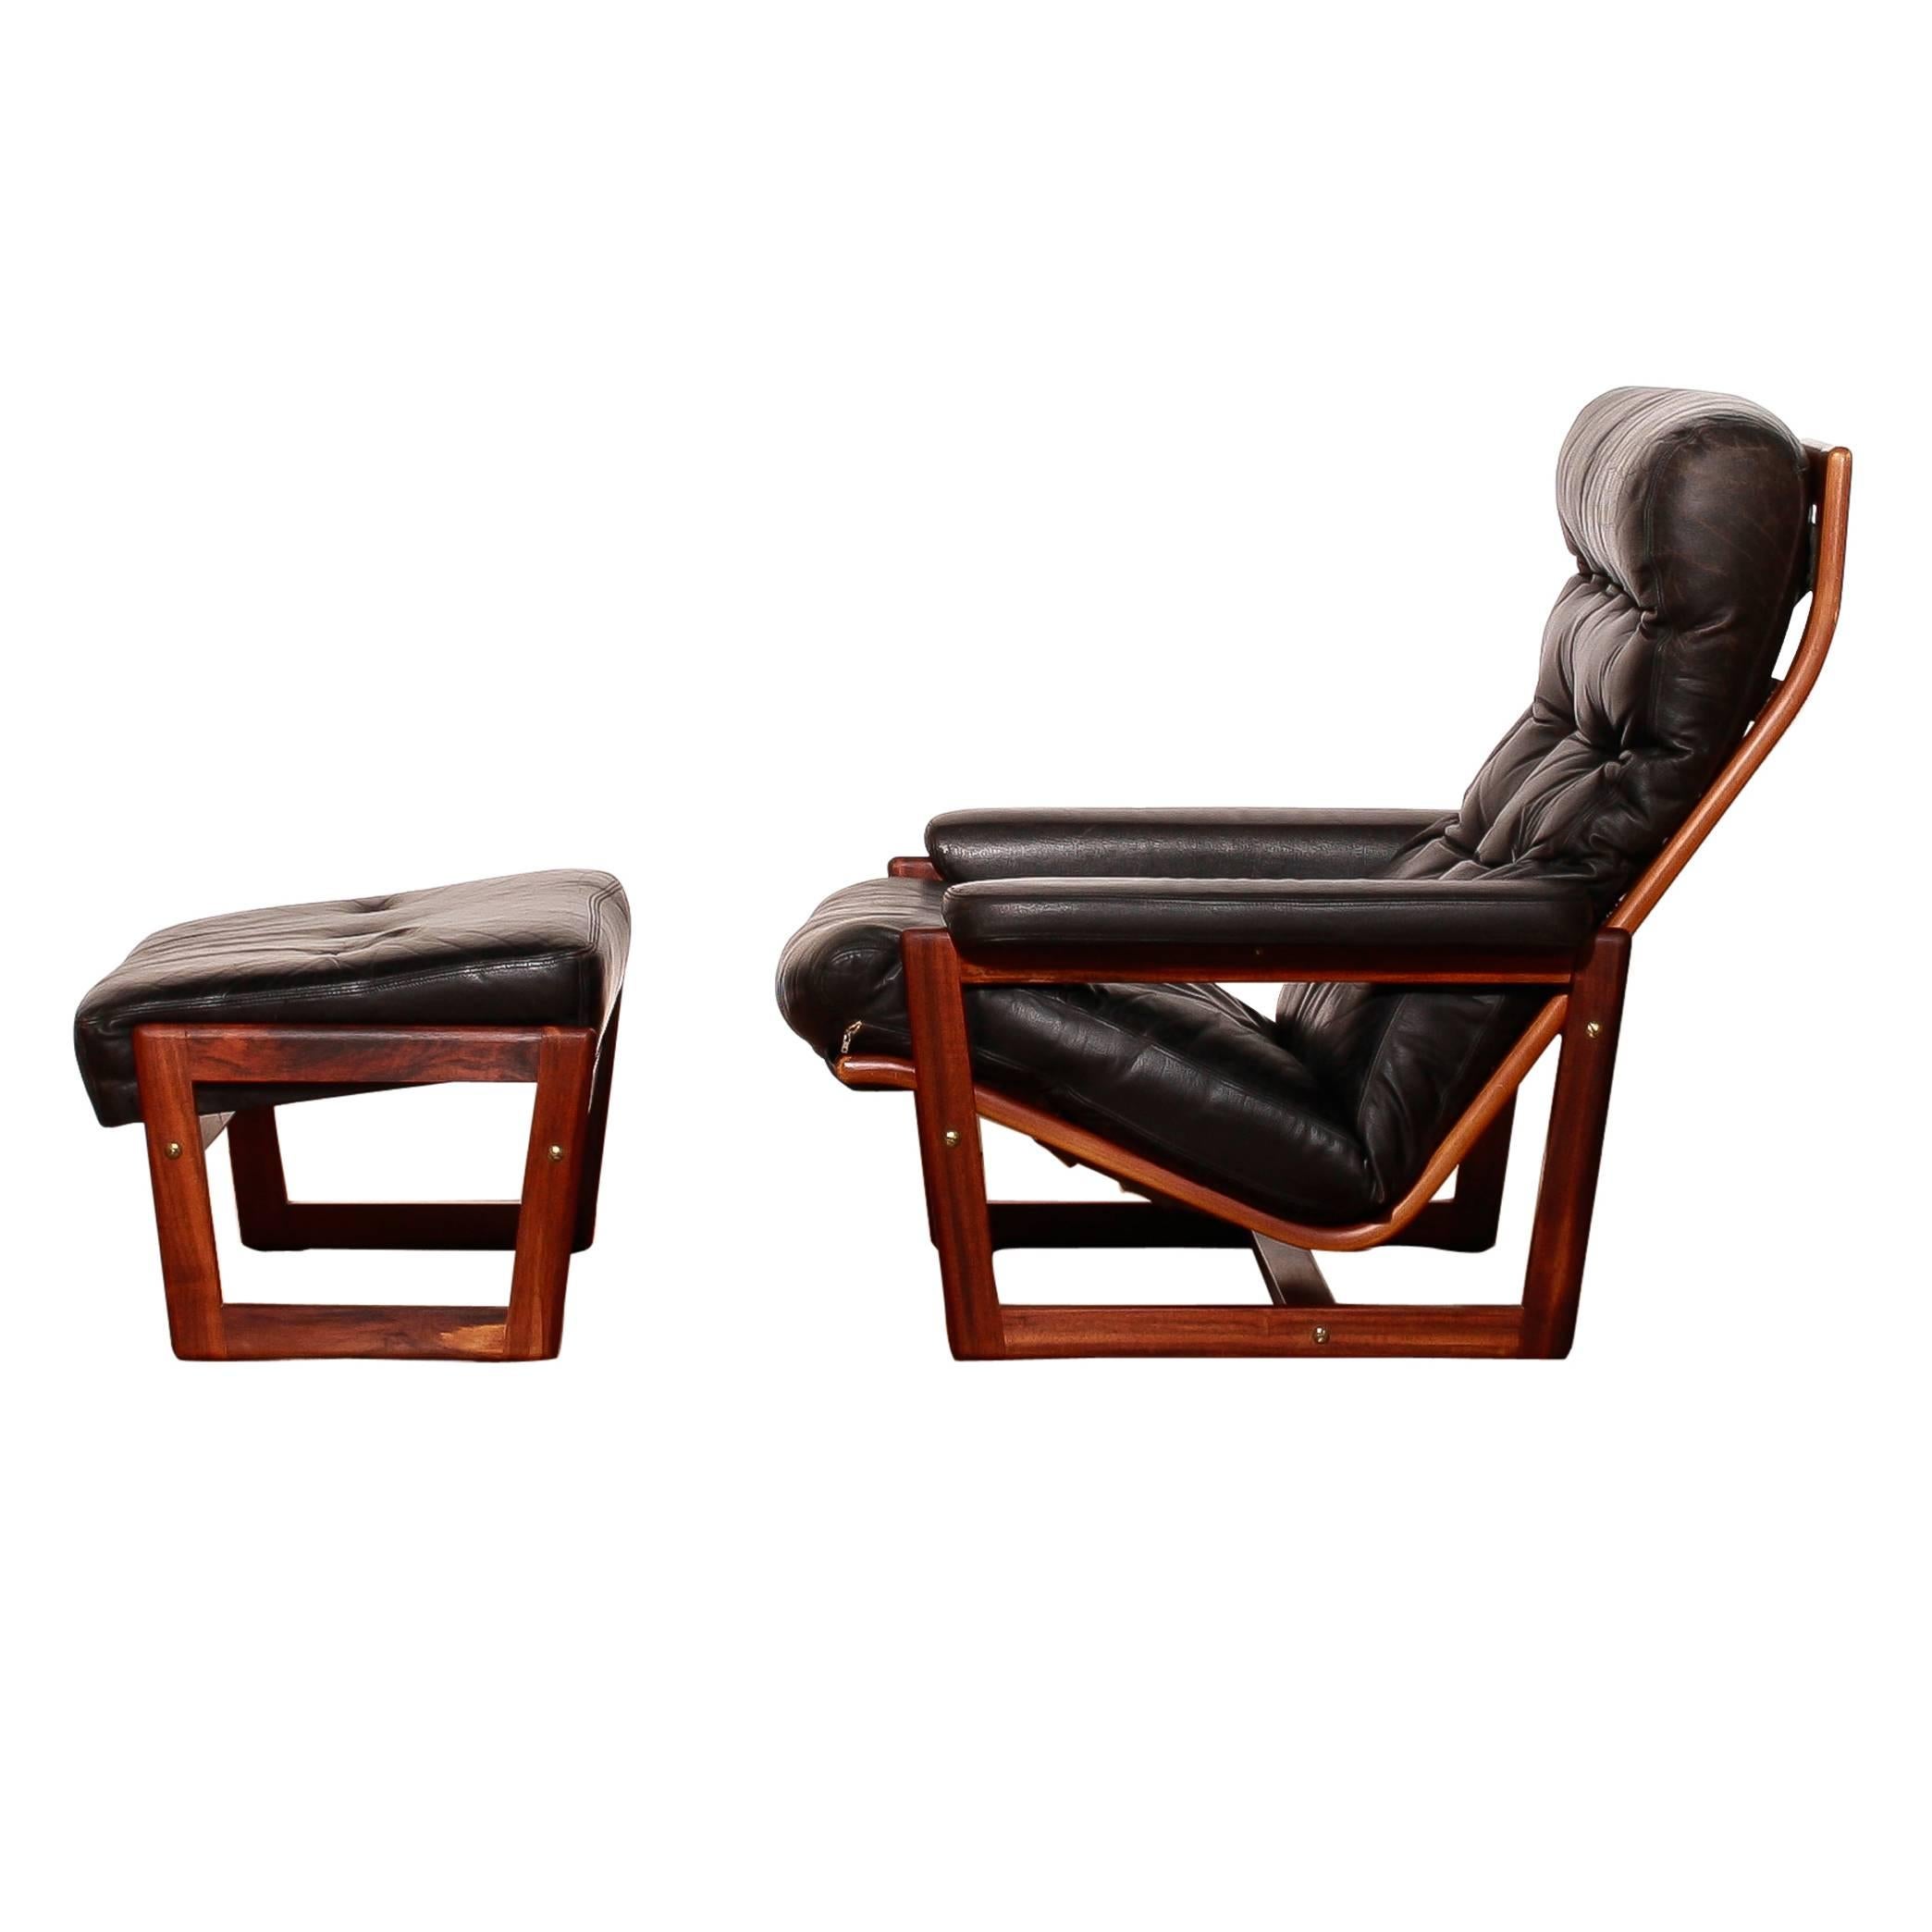 1950s-1960s, Lennart Bender for Ulferts, Leather Lounge Chair with Ottoman